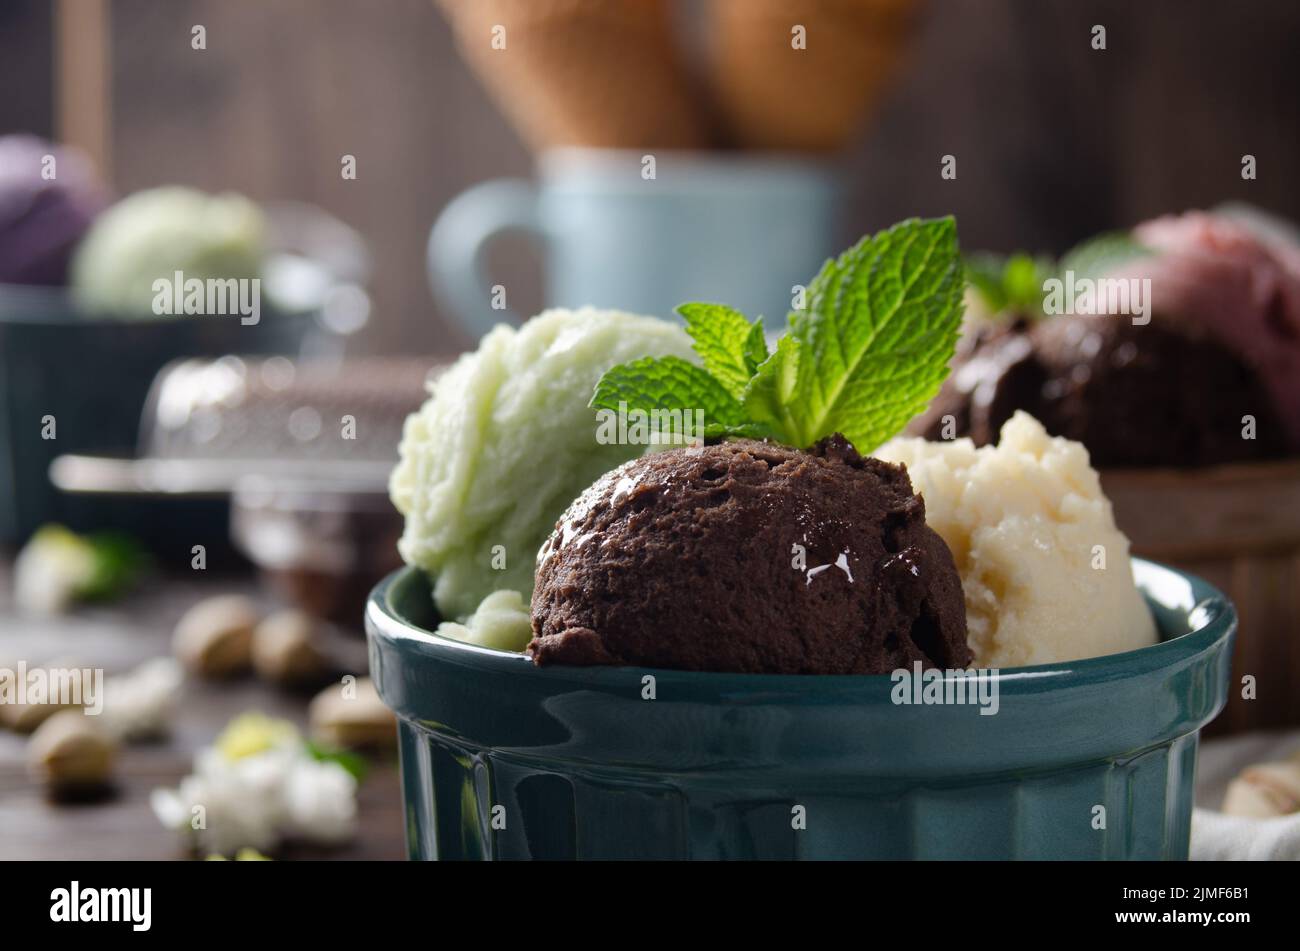 Three scoops of Vanilla pistachio and chocolate icecream balls in clay bowls on wooden kitchen table Stock Photo